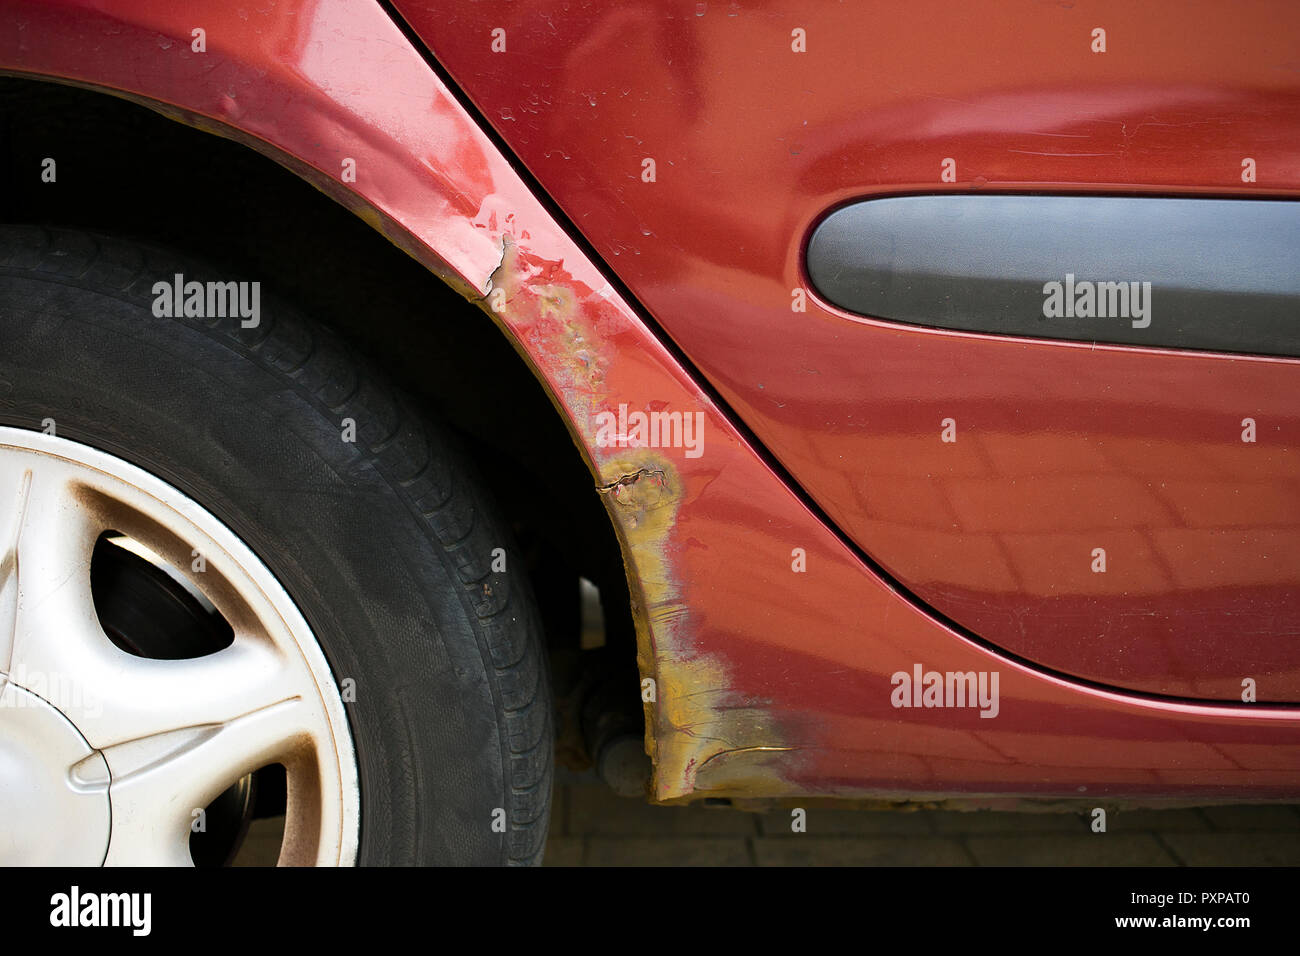 Rust is eating away vehicles' wheel arch, problem in older cars Stock Photo